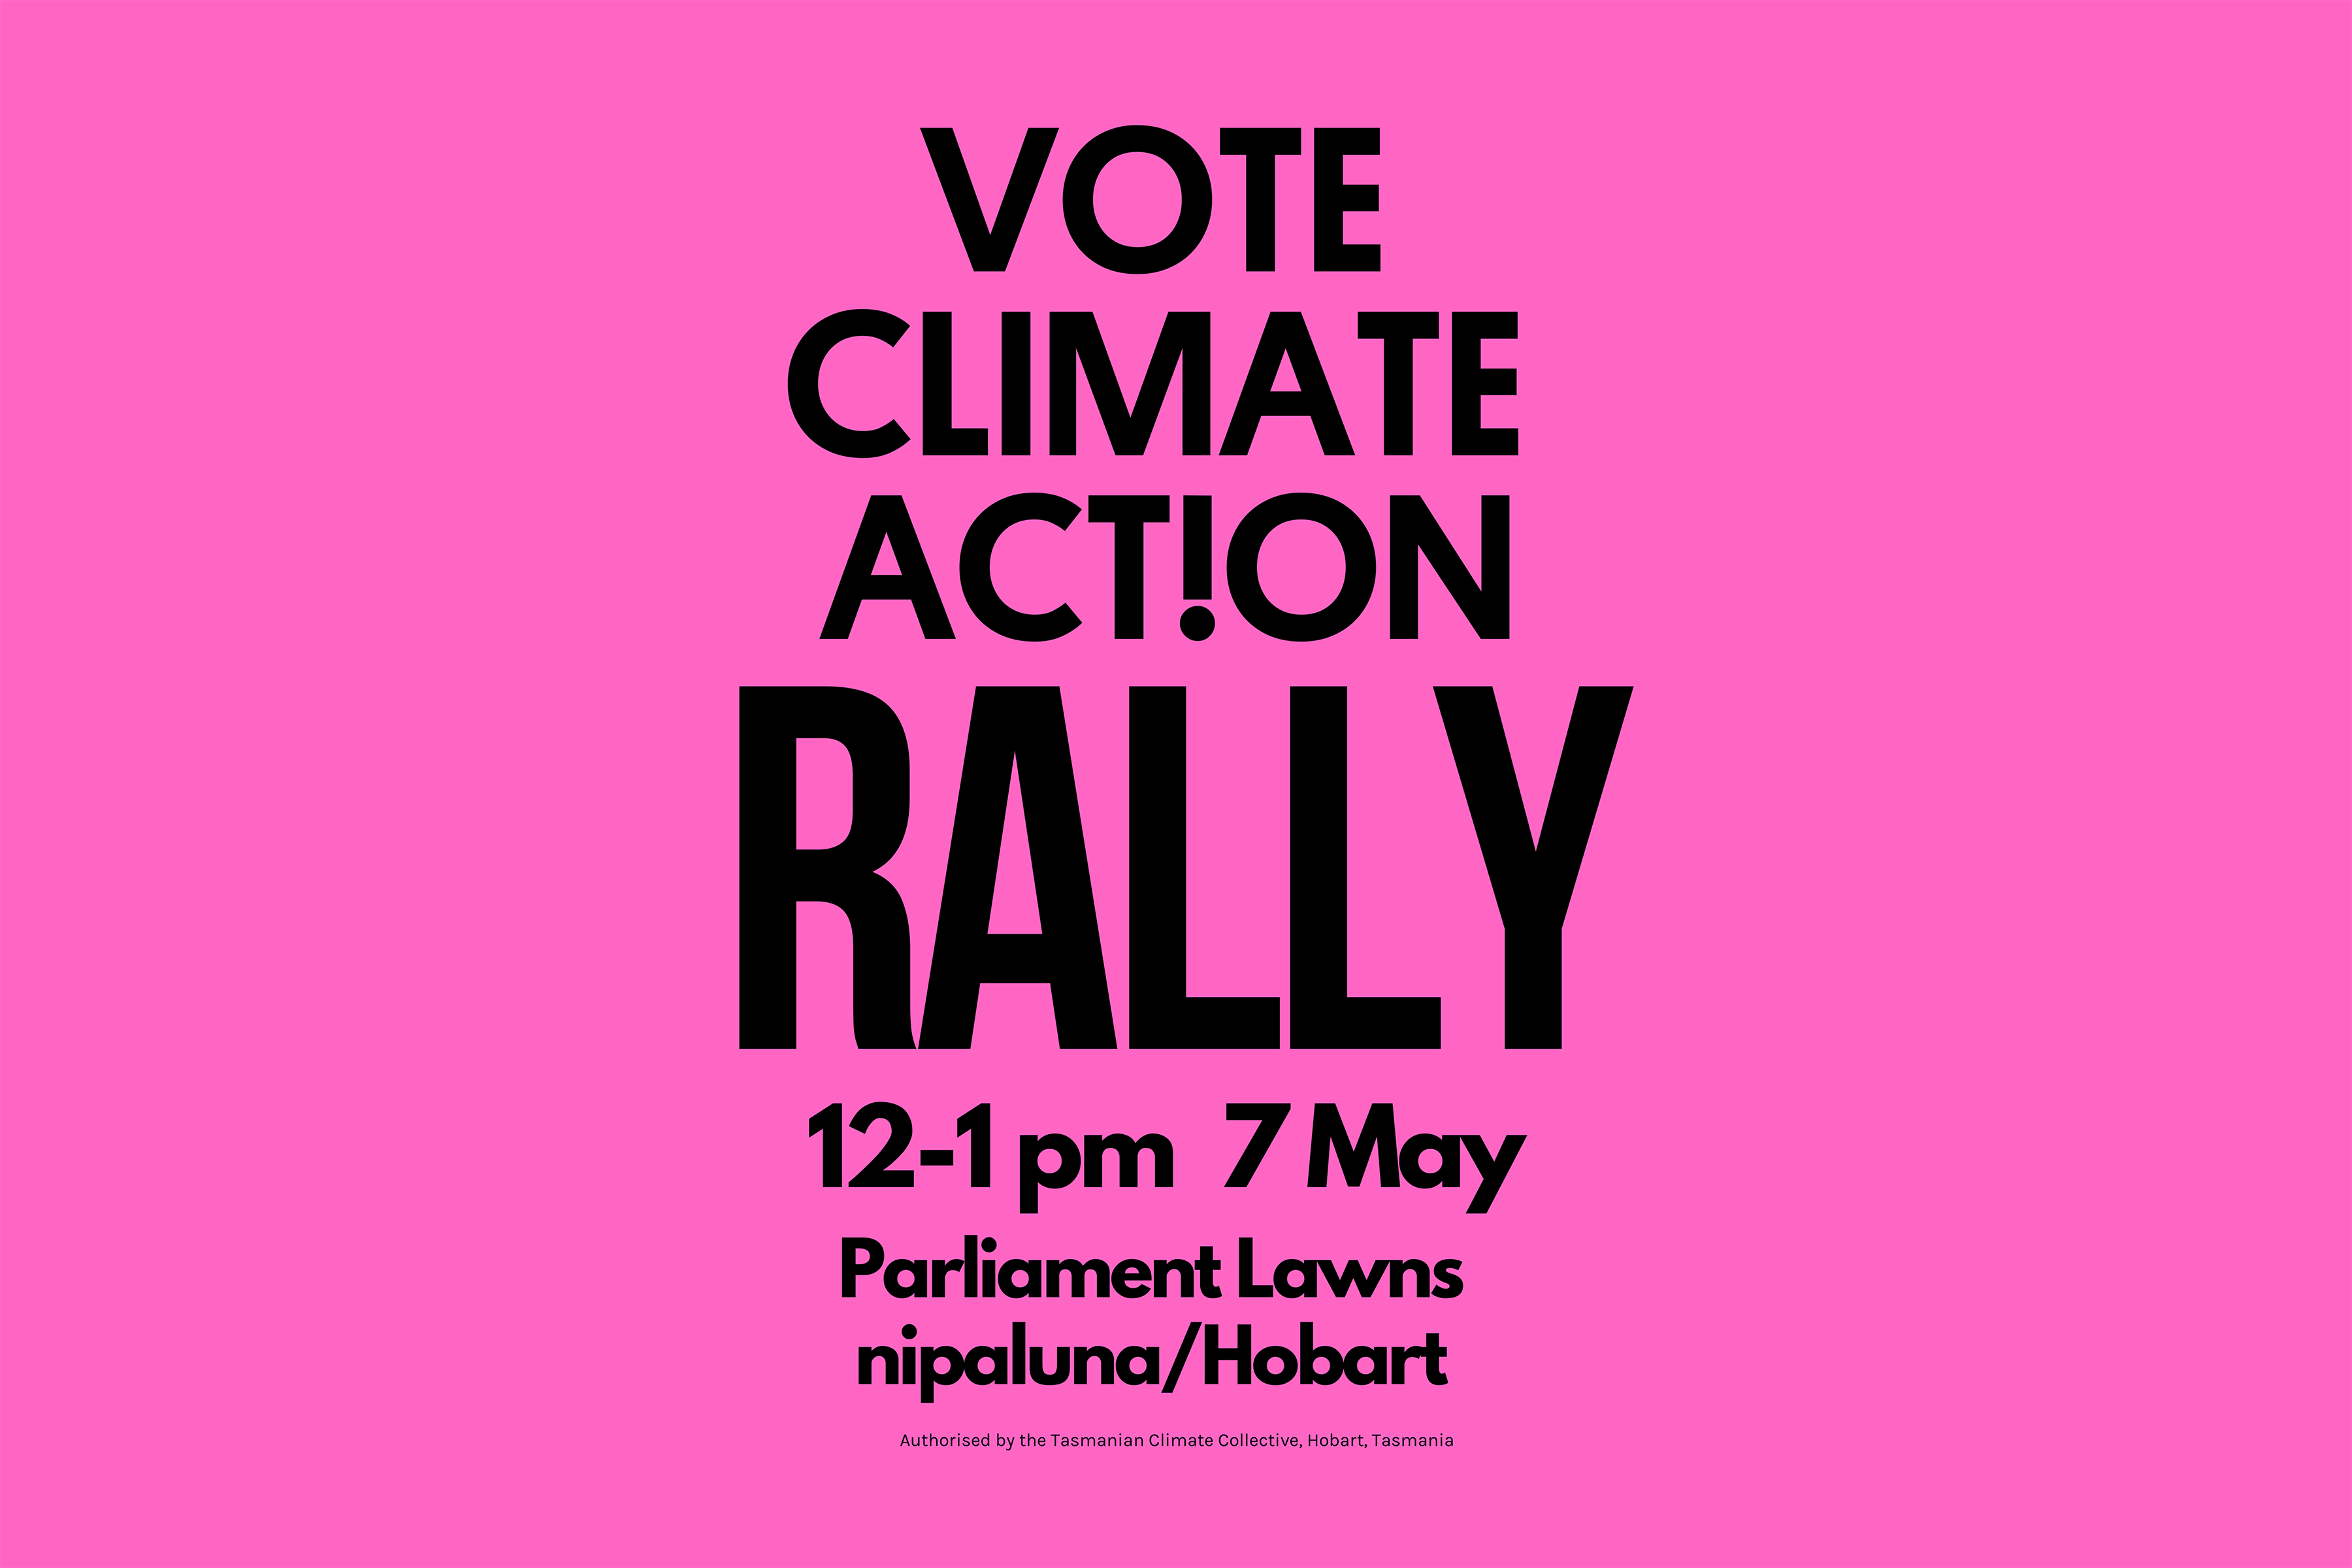 Vote Climate Action Rally. 12–1pm, 7 May 2022, Parliament Lawns, nipaluna / Hobart. Authorised by the Tasmanian Climate Collective, Hobart Tasmania.